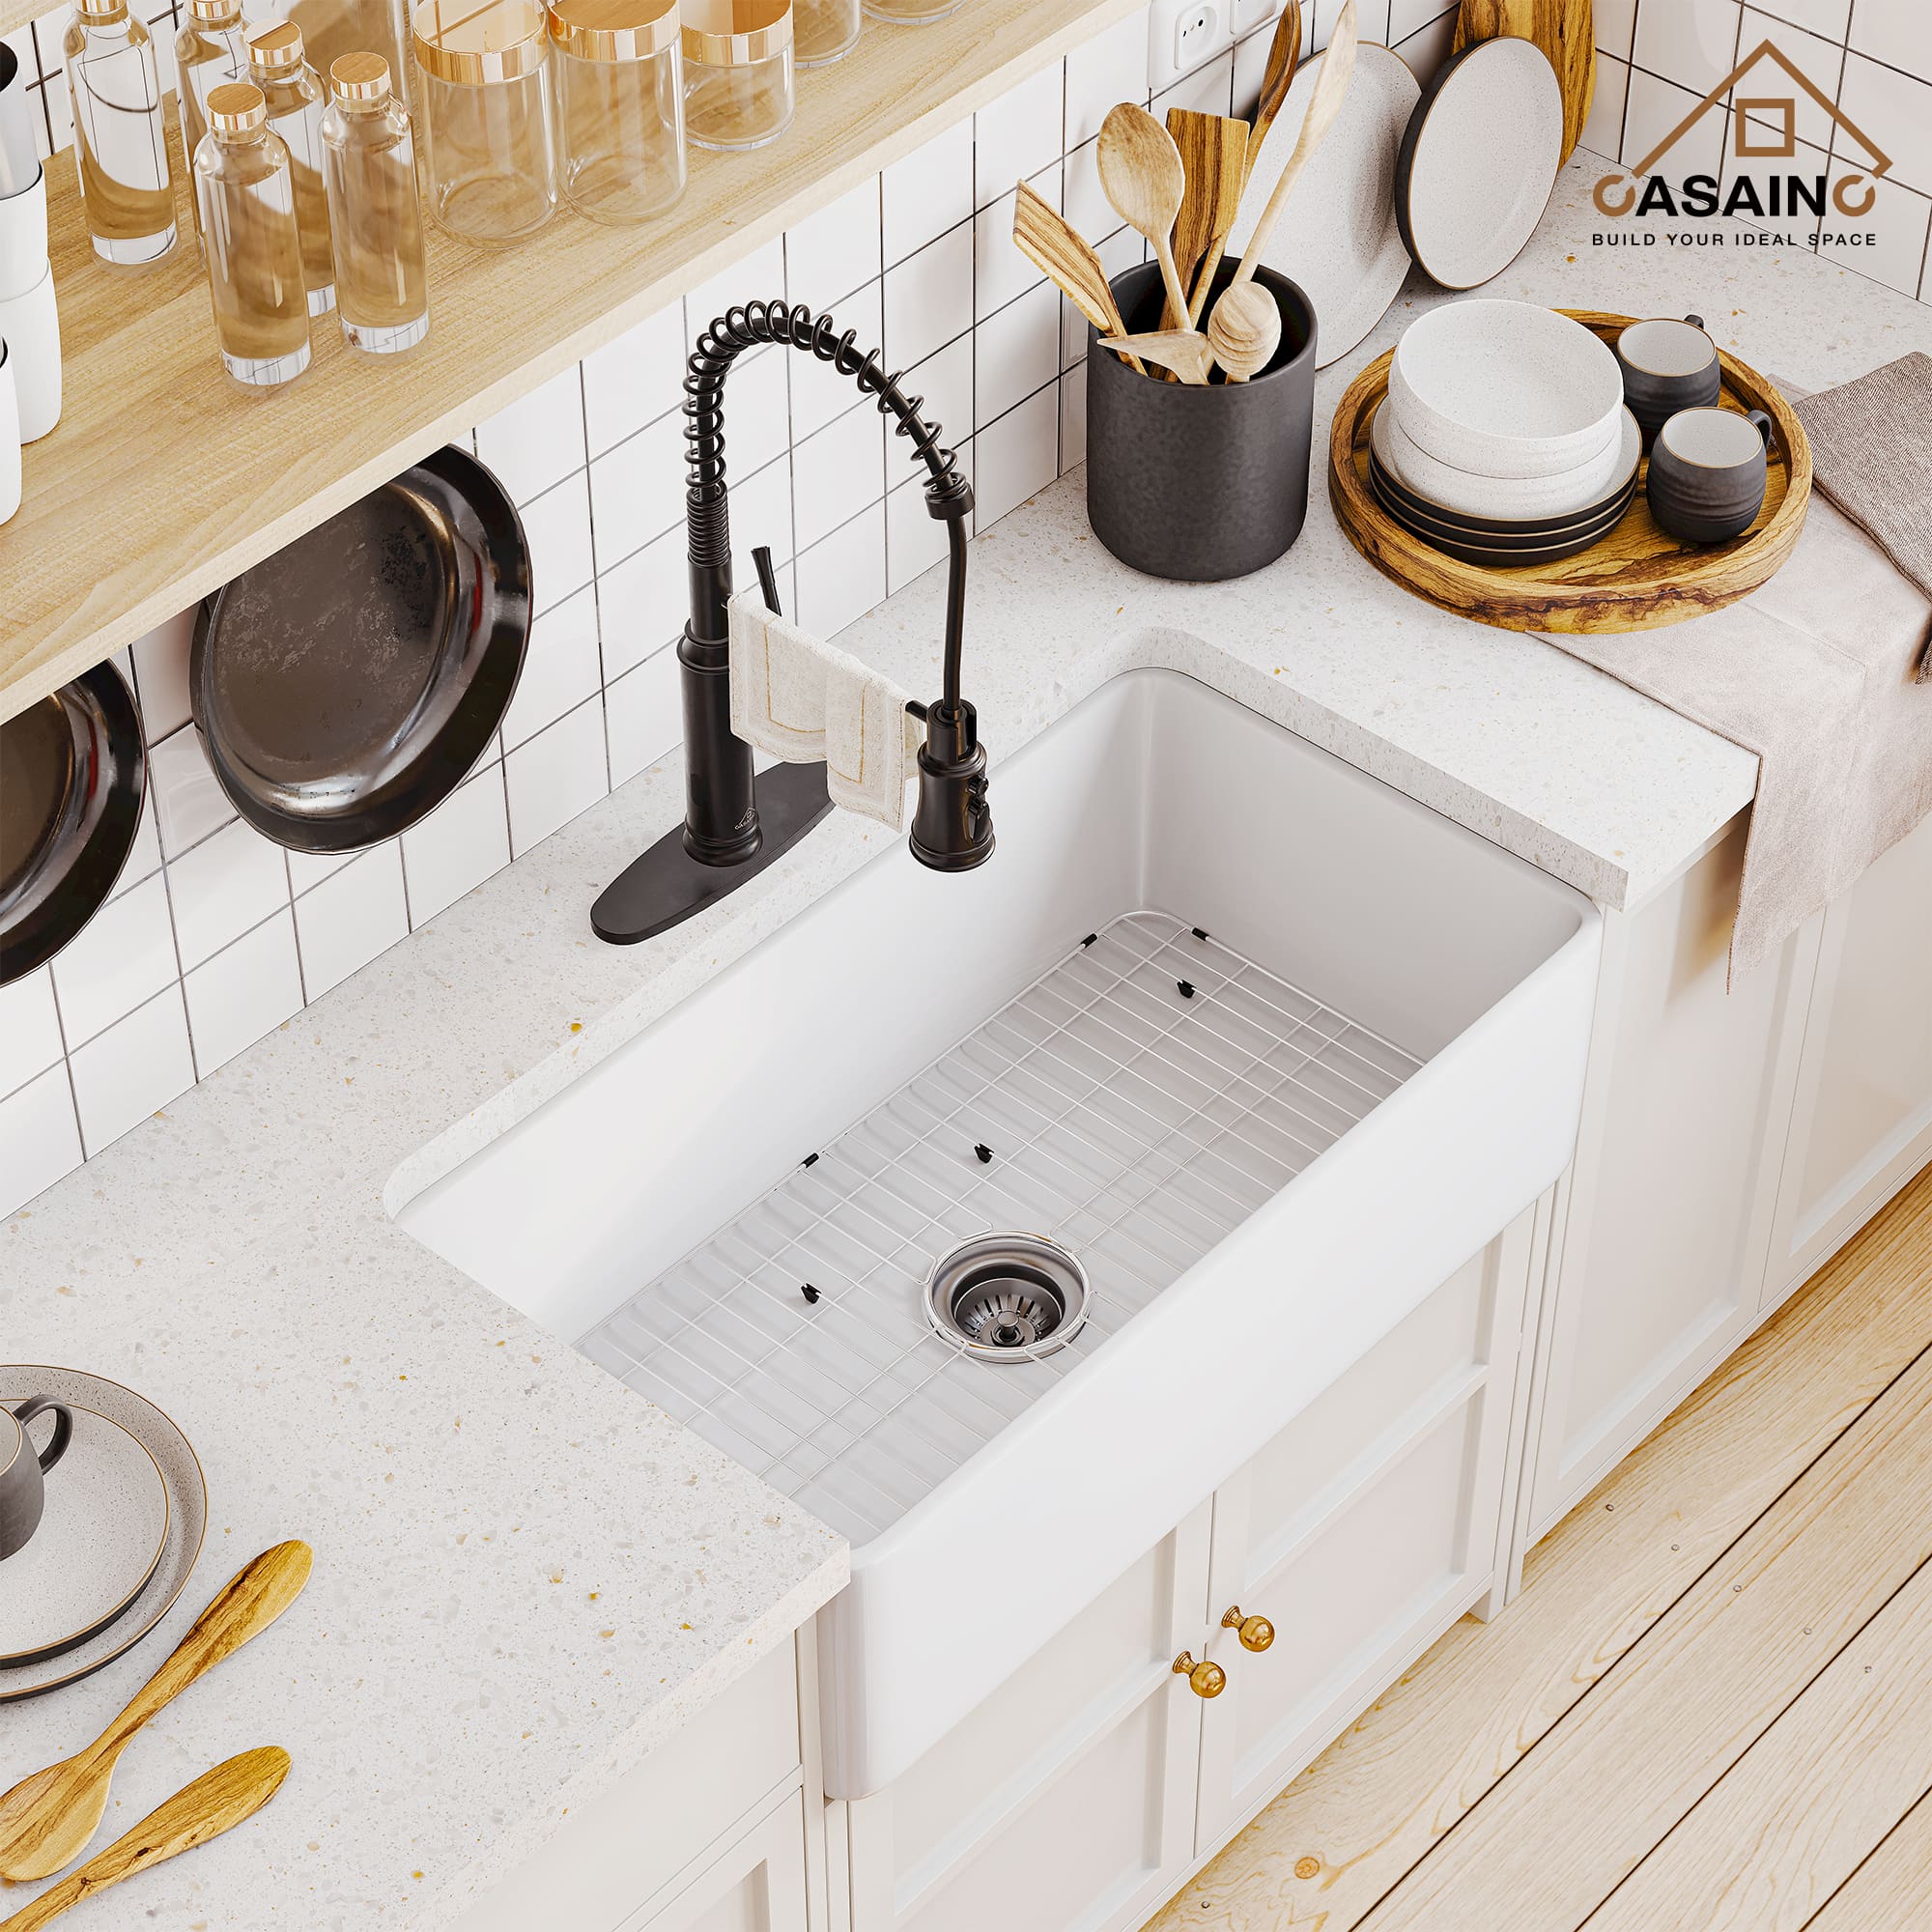 Fireclay 33 in. Single Bowl Farmhouse Apron Kitchen Sink with Bottom Grid and Strainers With cUPC Certified, in White Glossy/Matte Black